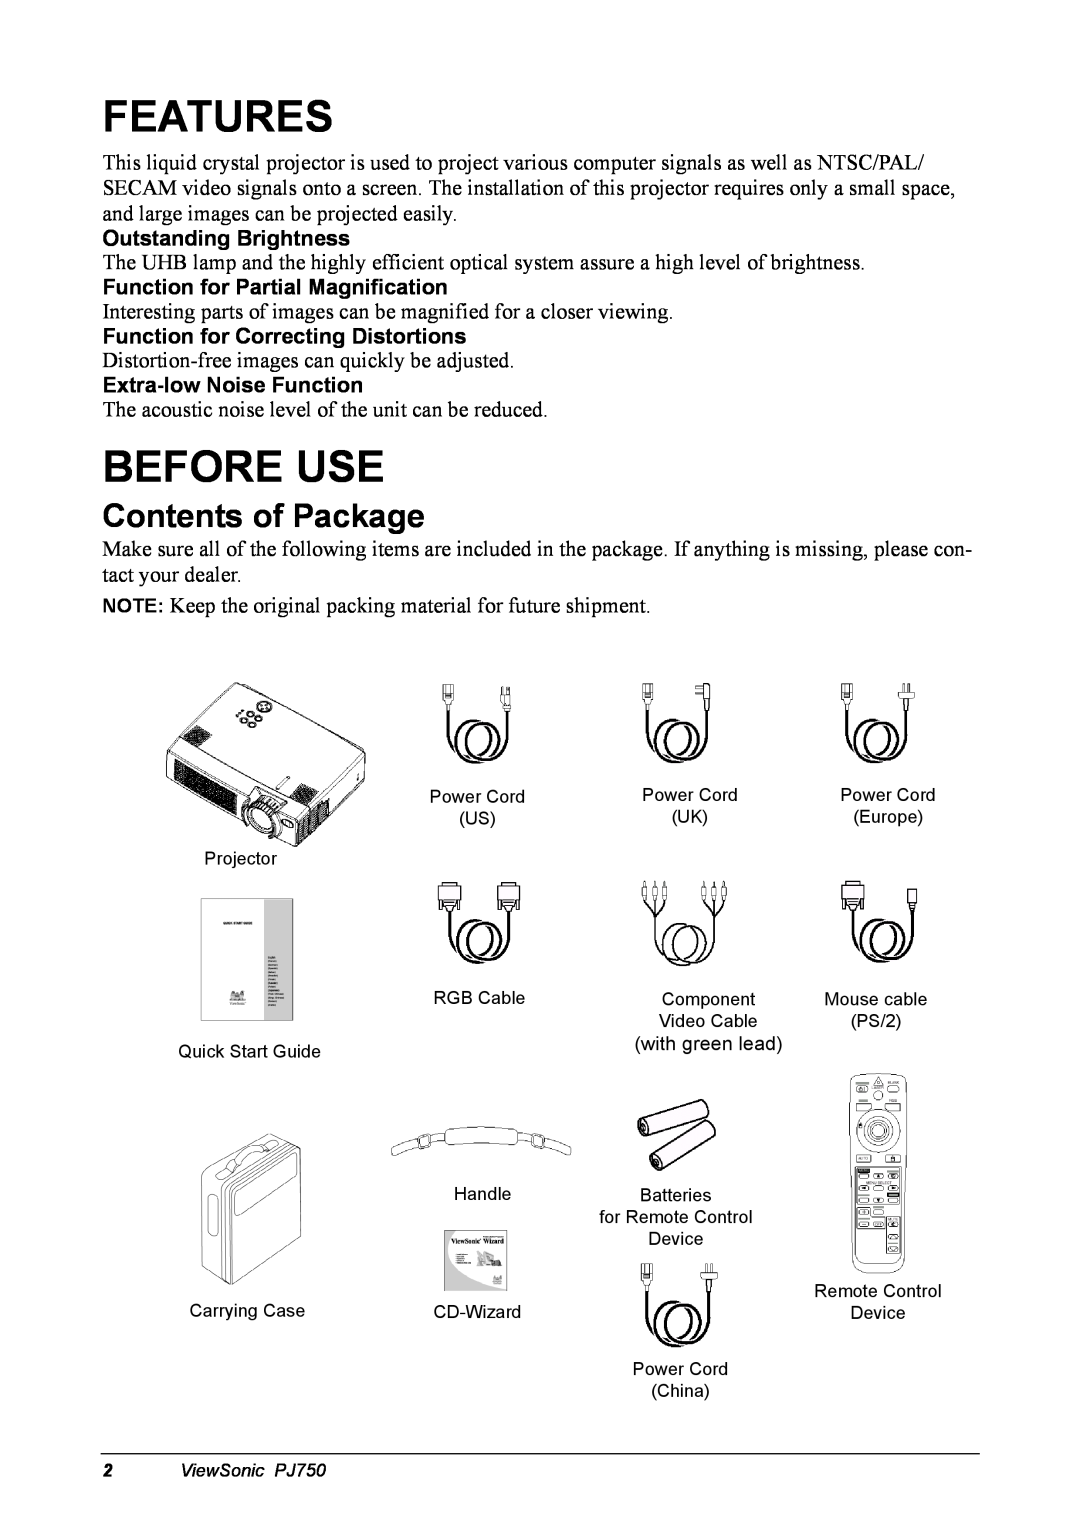 ViewSonic 300 manual Features, Before Use, Contents of Package, Outstanding Brightness, Function for Partial Magnification 